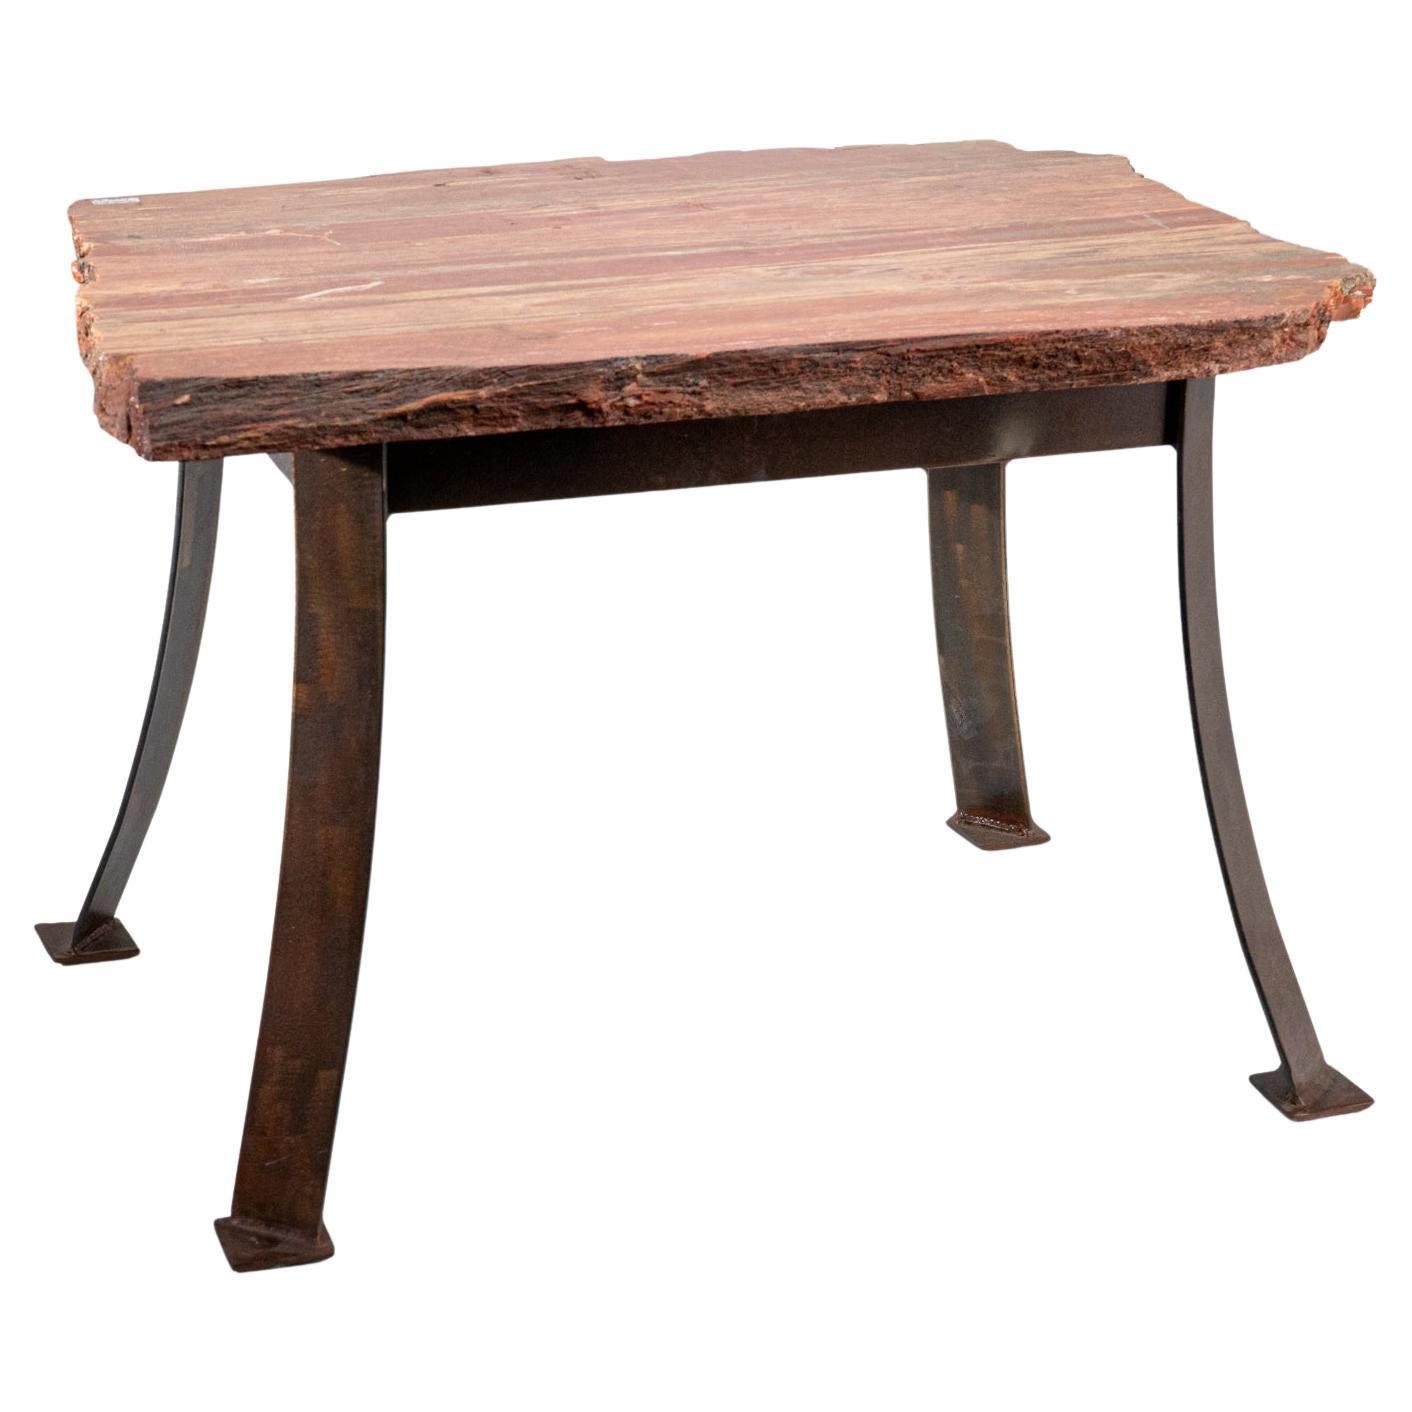 This beautiful hand-polished petrified wood table is sourced from Madagascar, features a 1